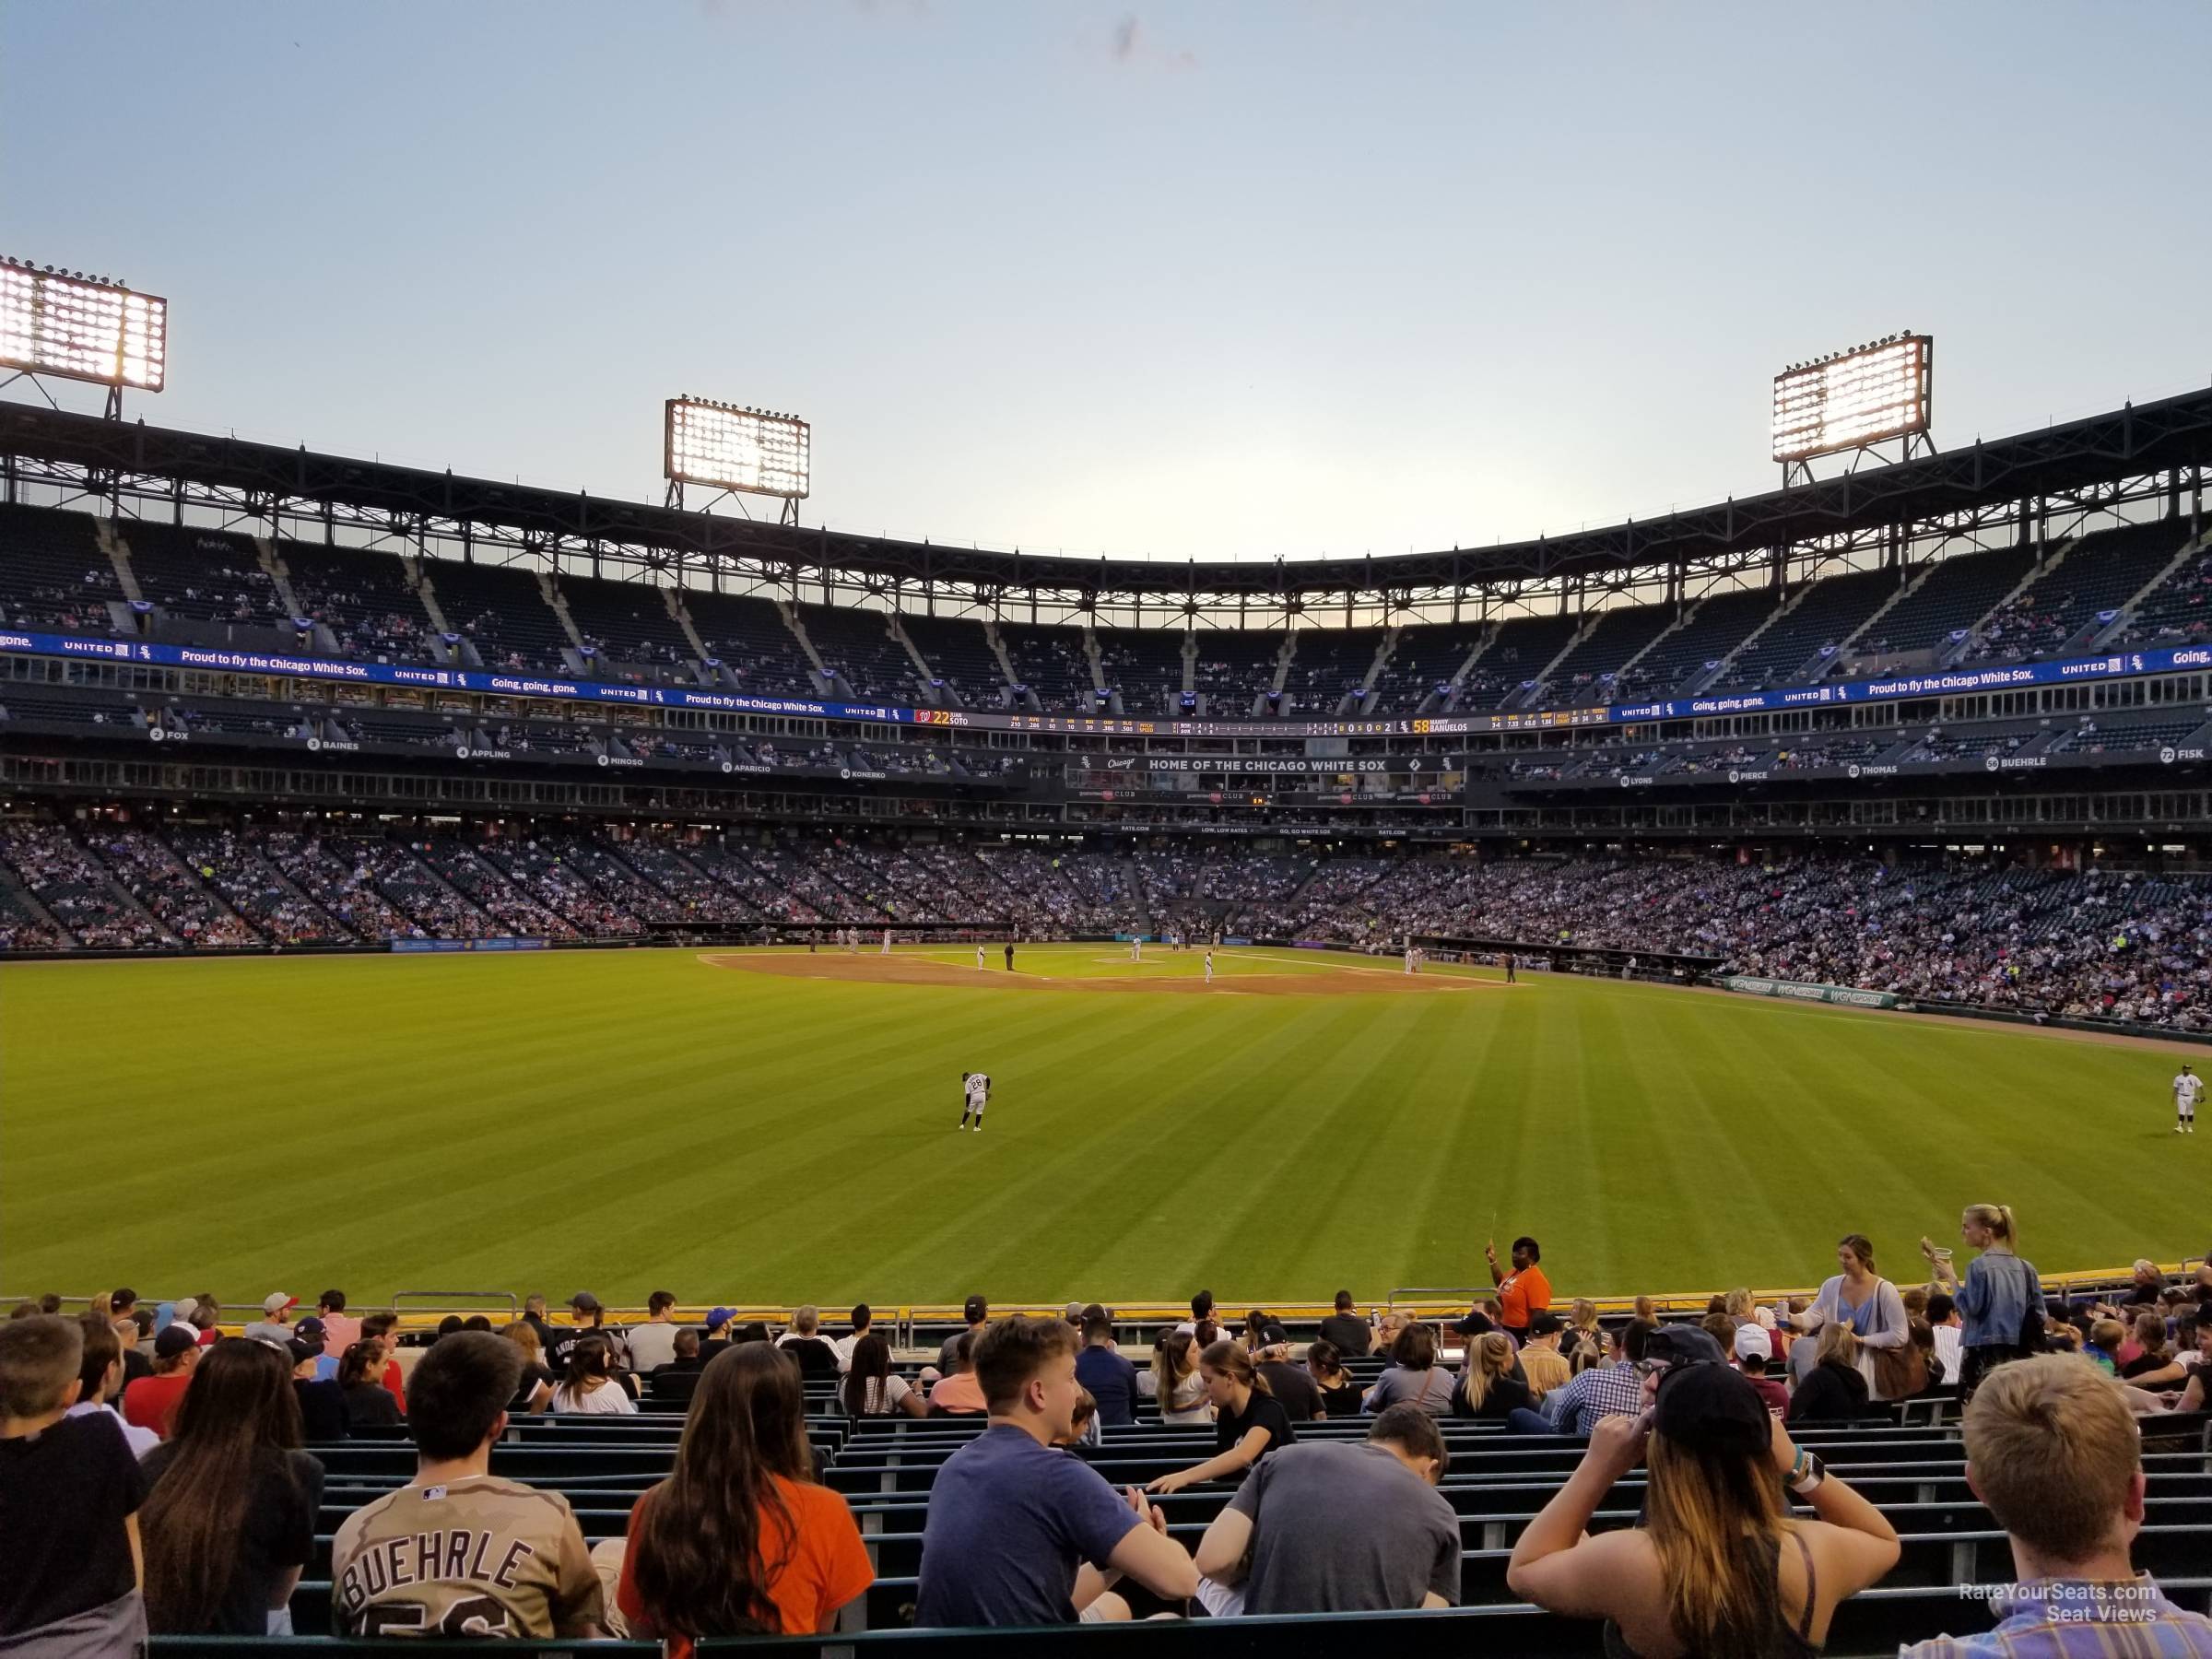 section 163, row 21 seat view  - guaranteed rate field